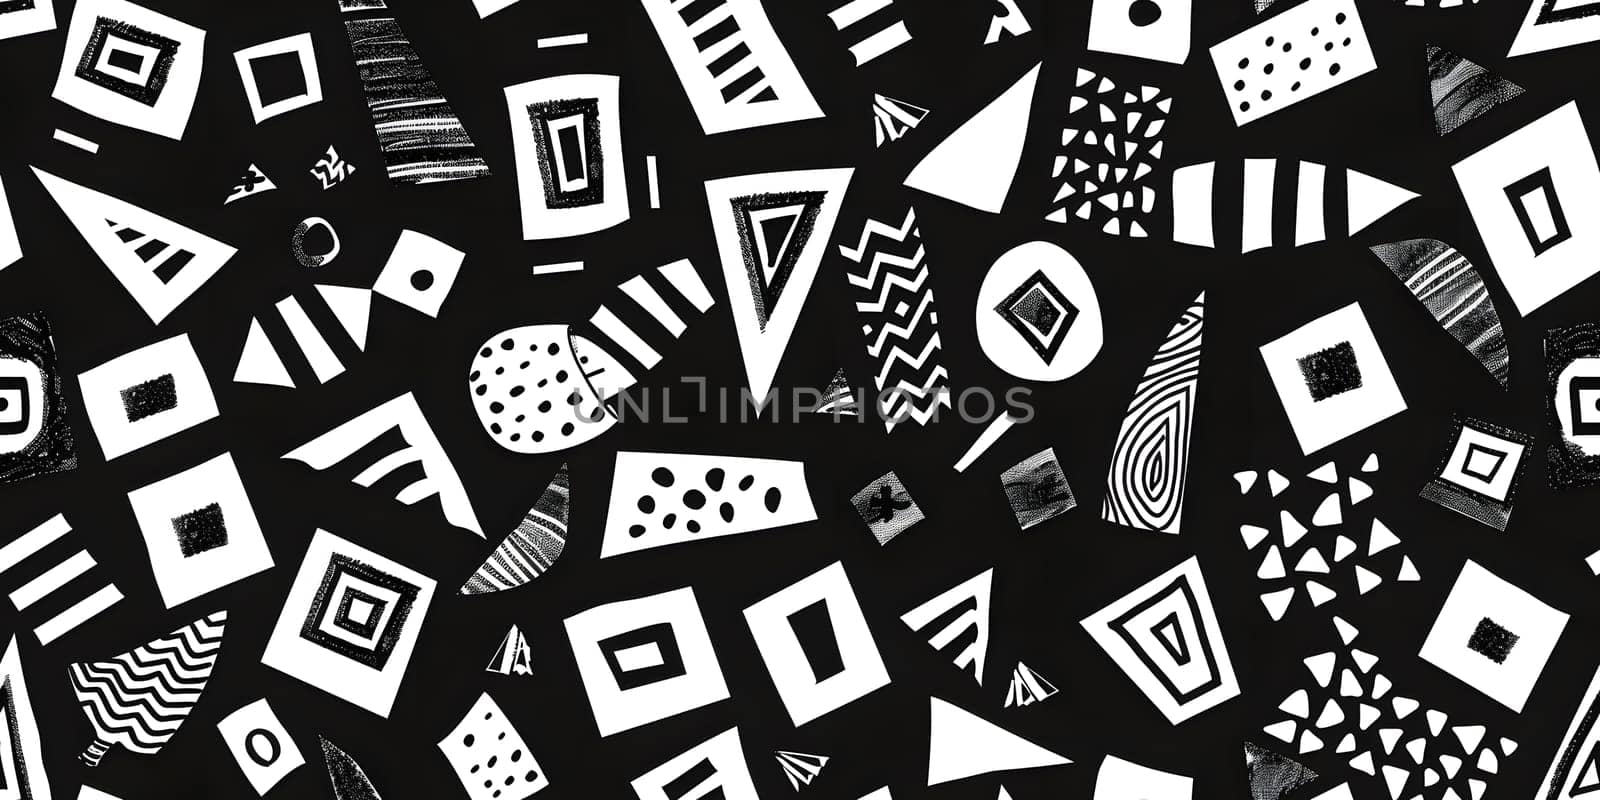 a black and white geometric pattern with triangles and squares on a black background by Nadtochiy